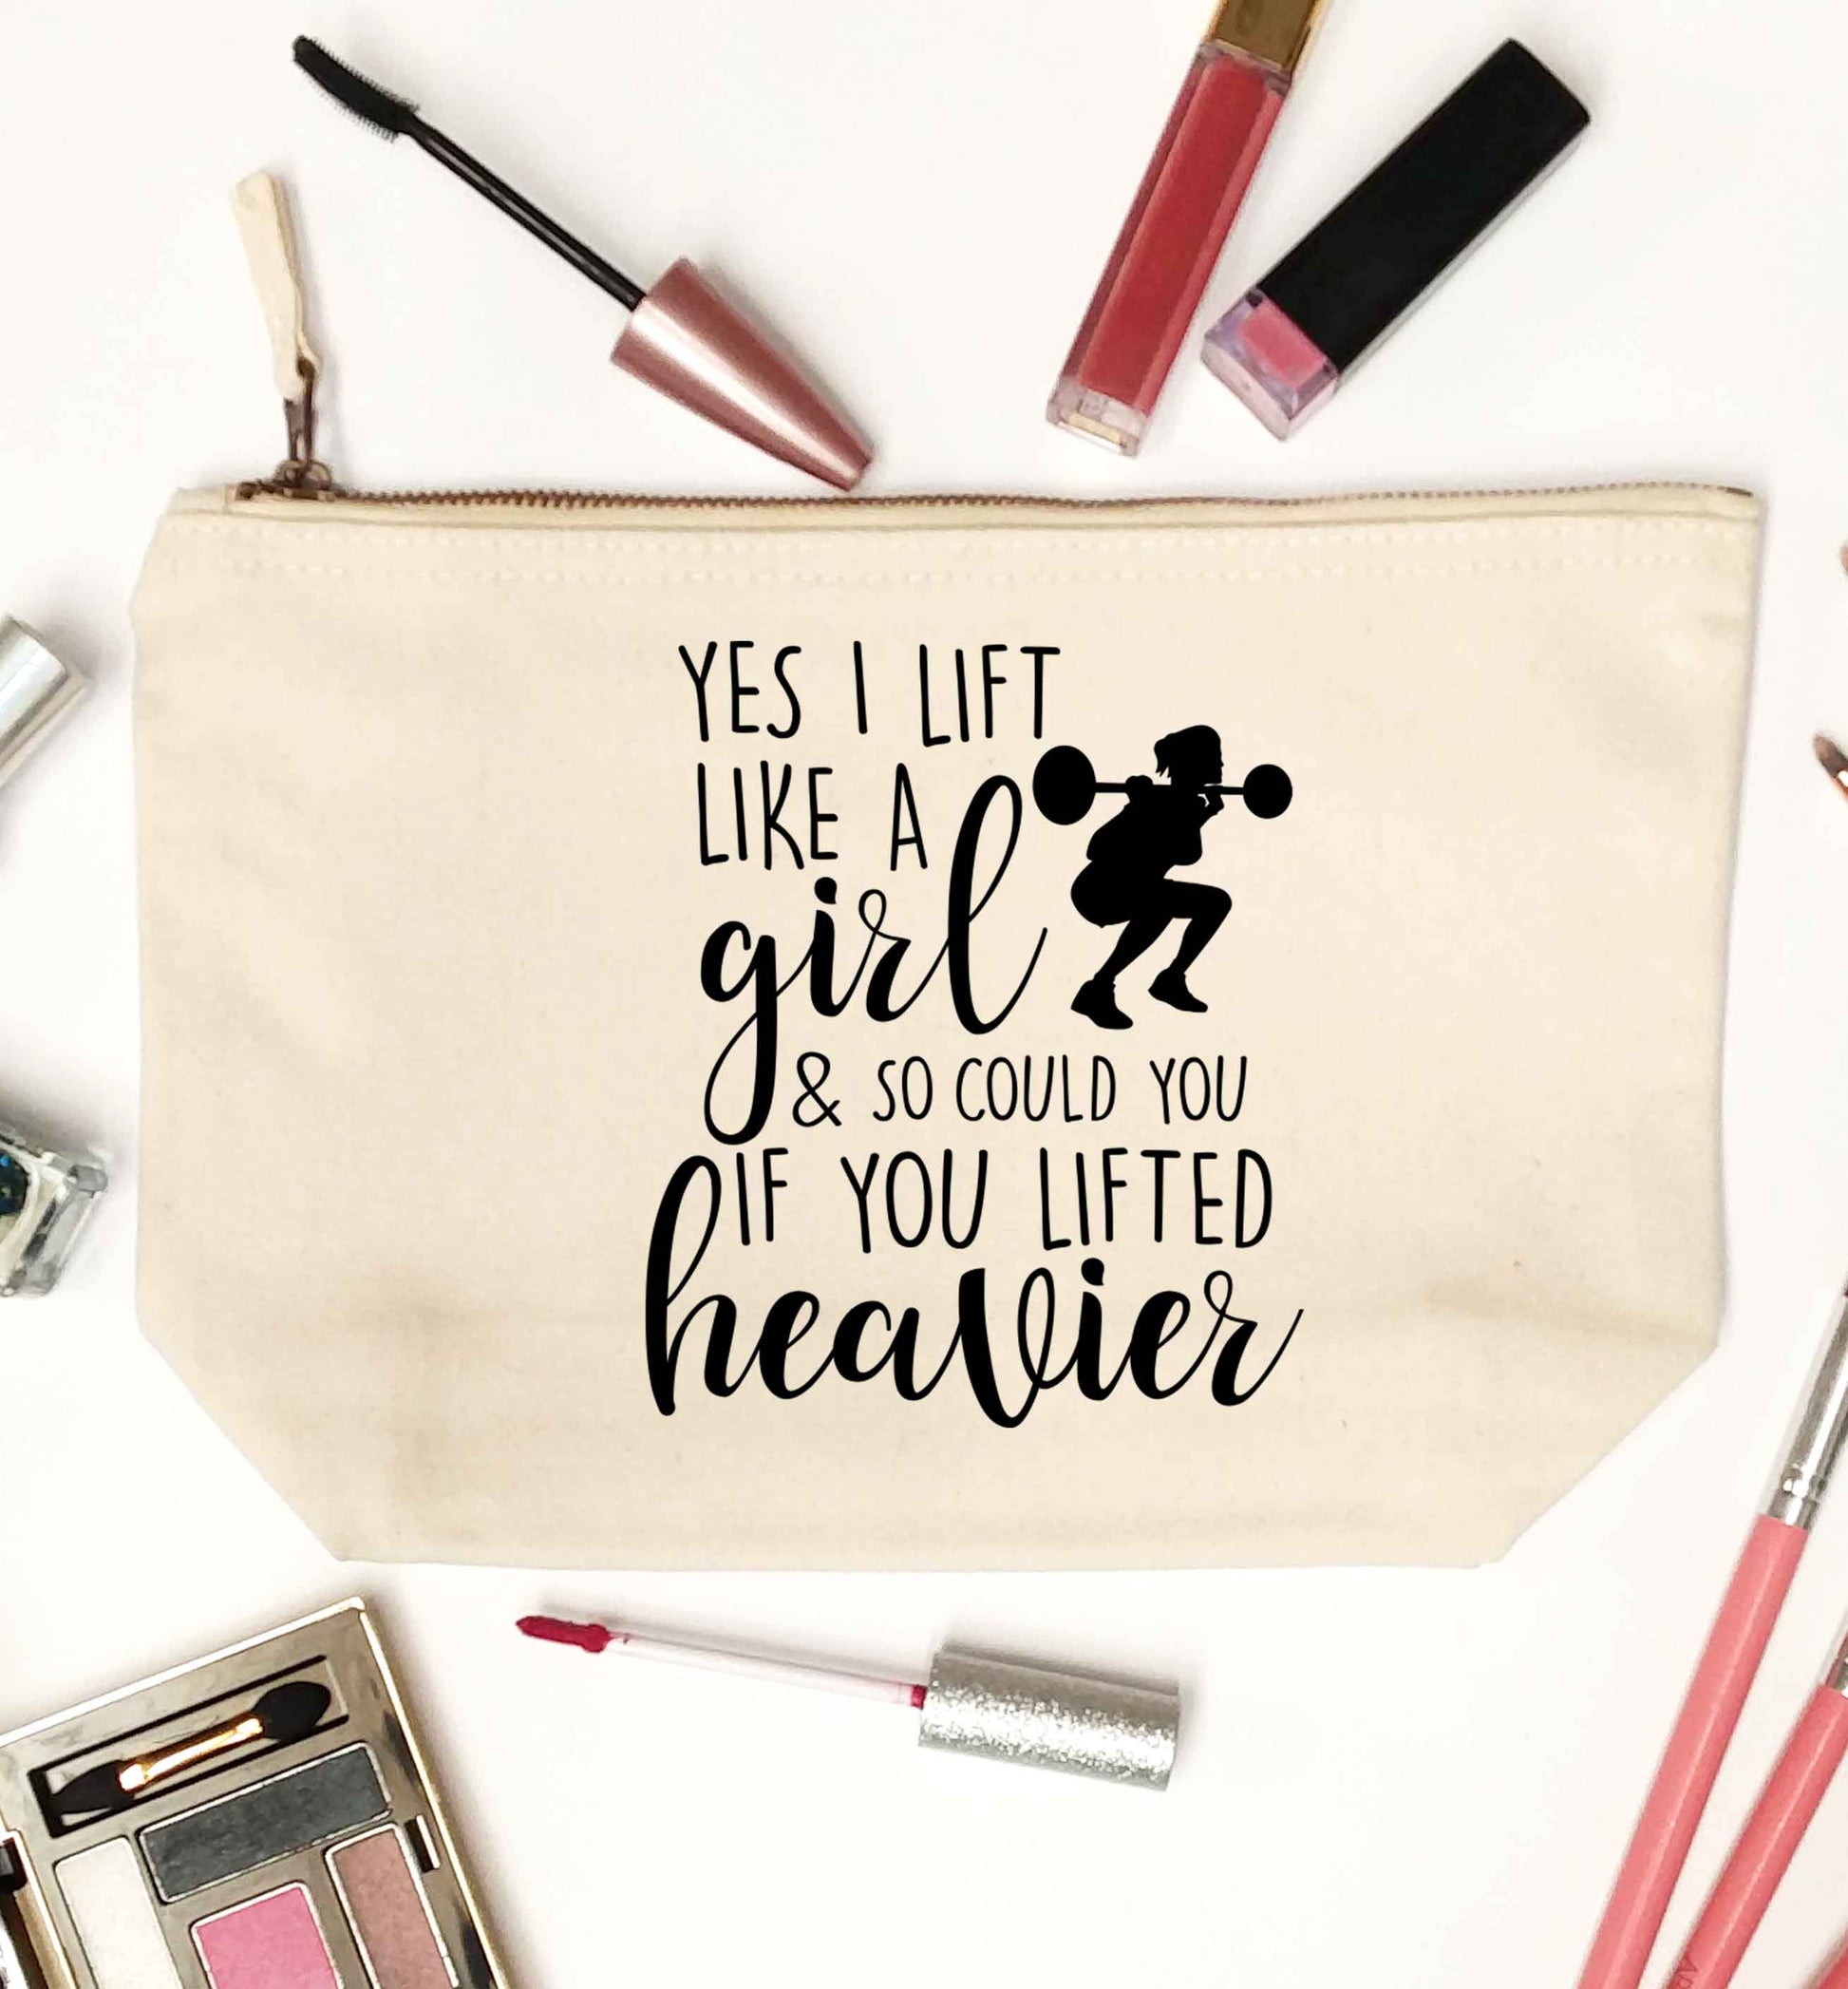 Yes I lift like a girl and so could you if you lifted heavier natural makeup bag